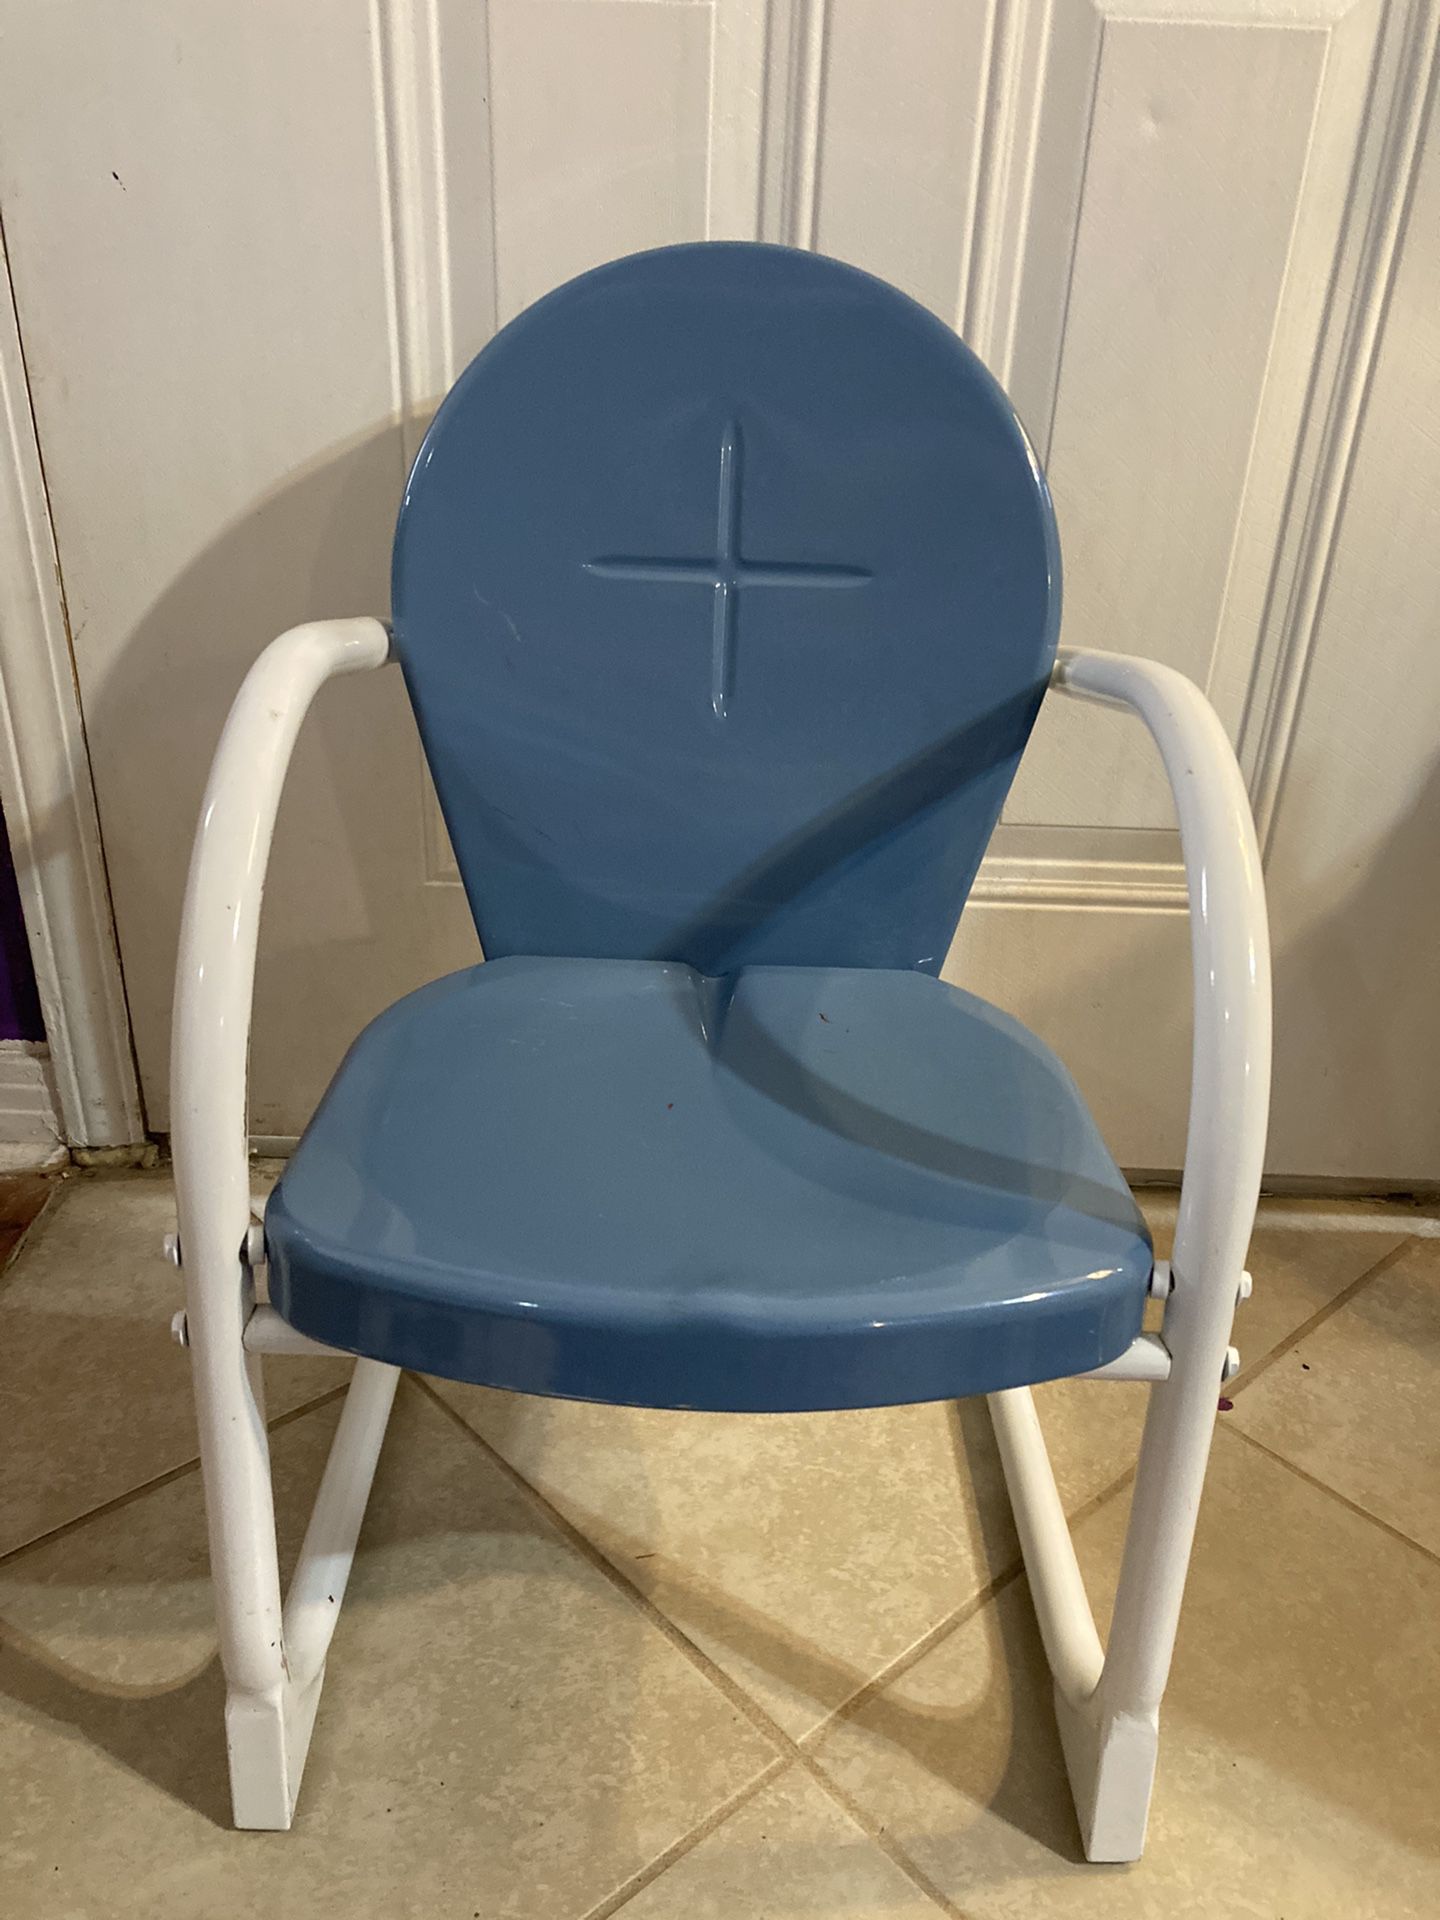 Small Metal Childrens Chair